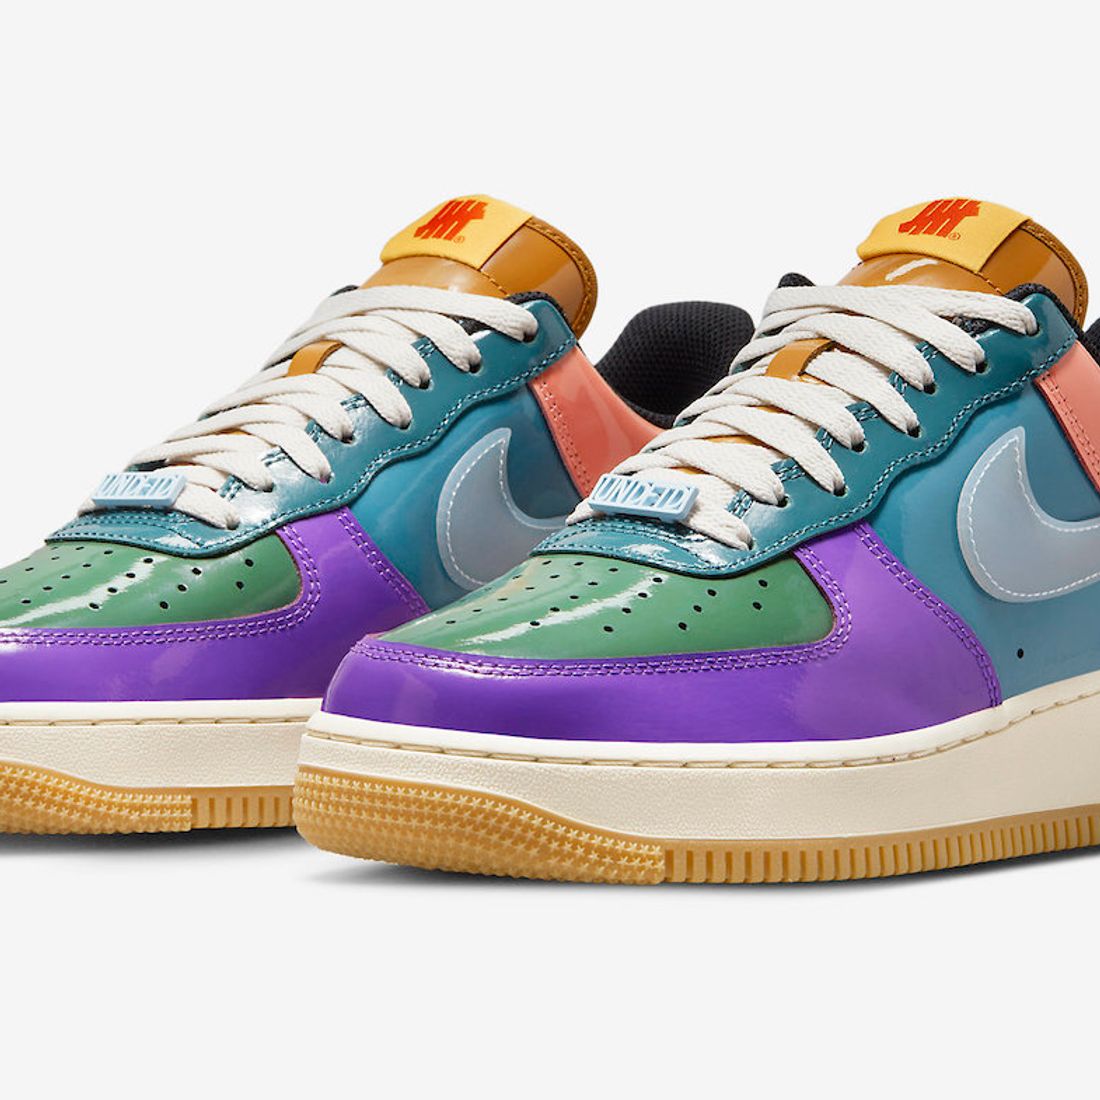 Undefeated x Nike Air Force 1 Low Multi-Color - Size 10 Men